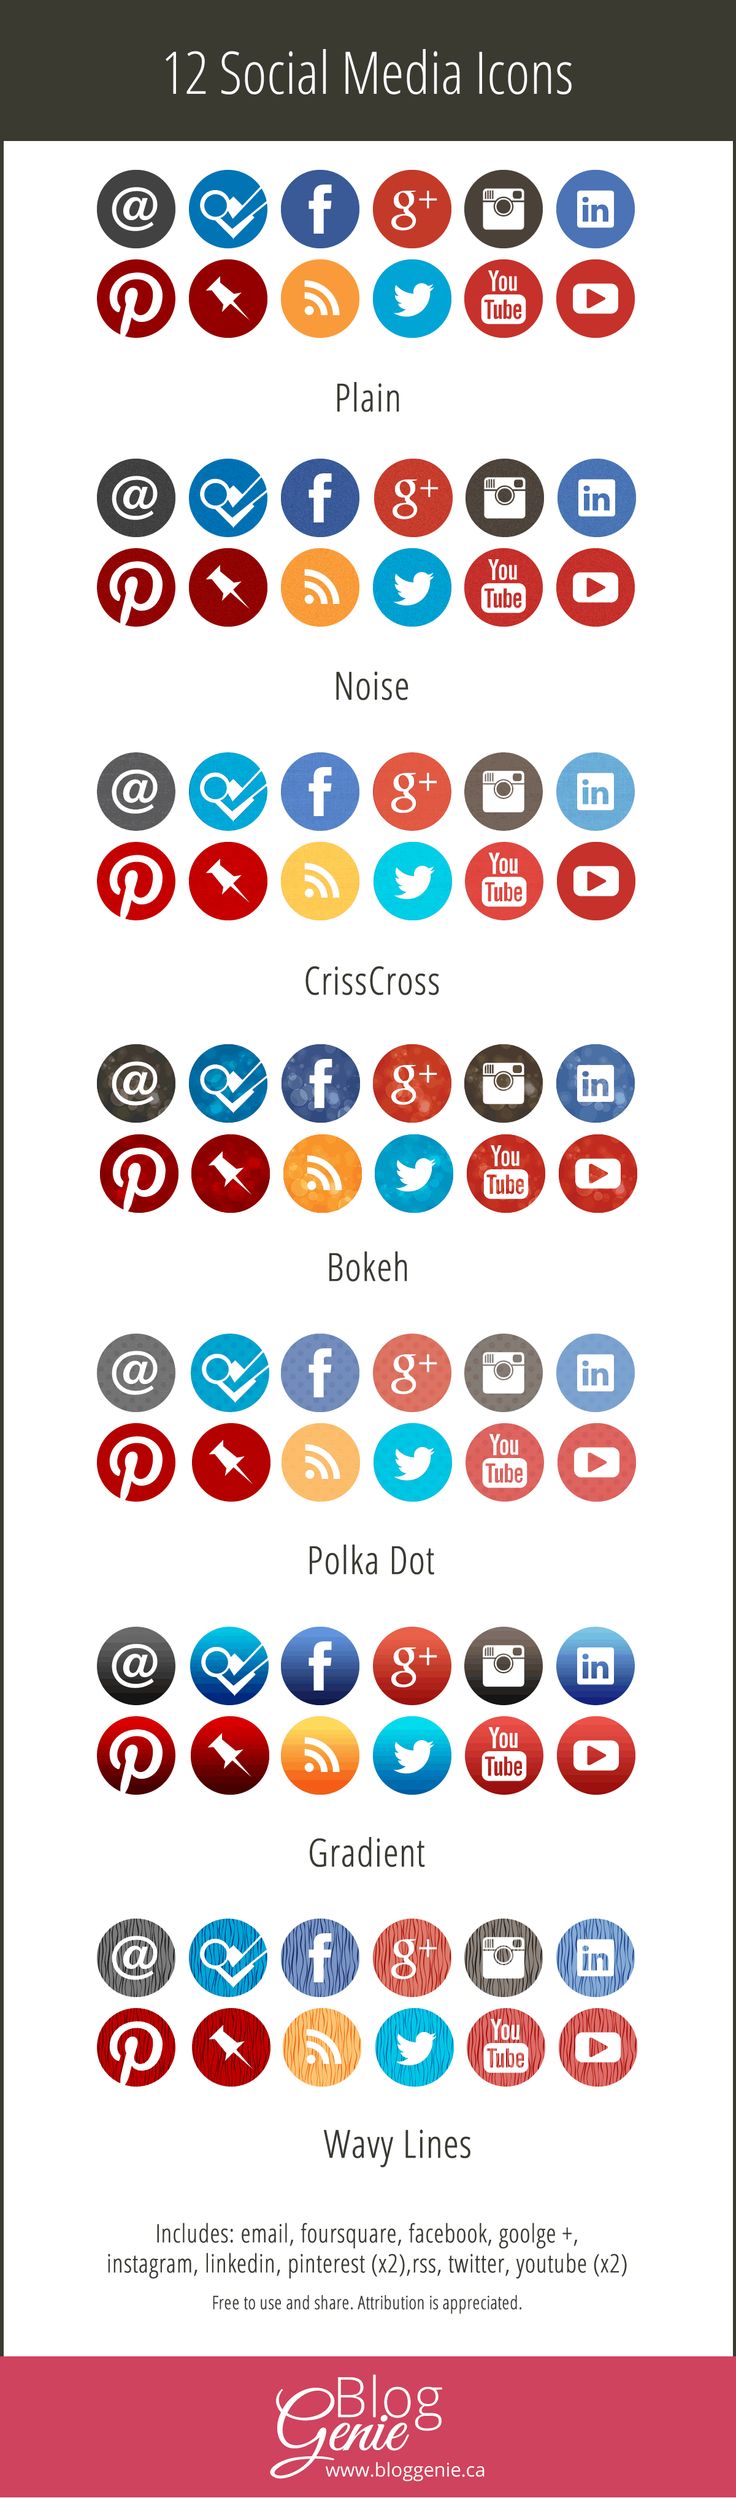 11 Social Media Icons One Color Images